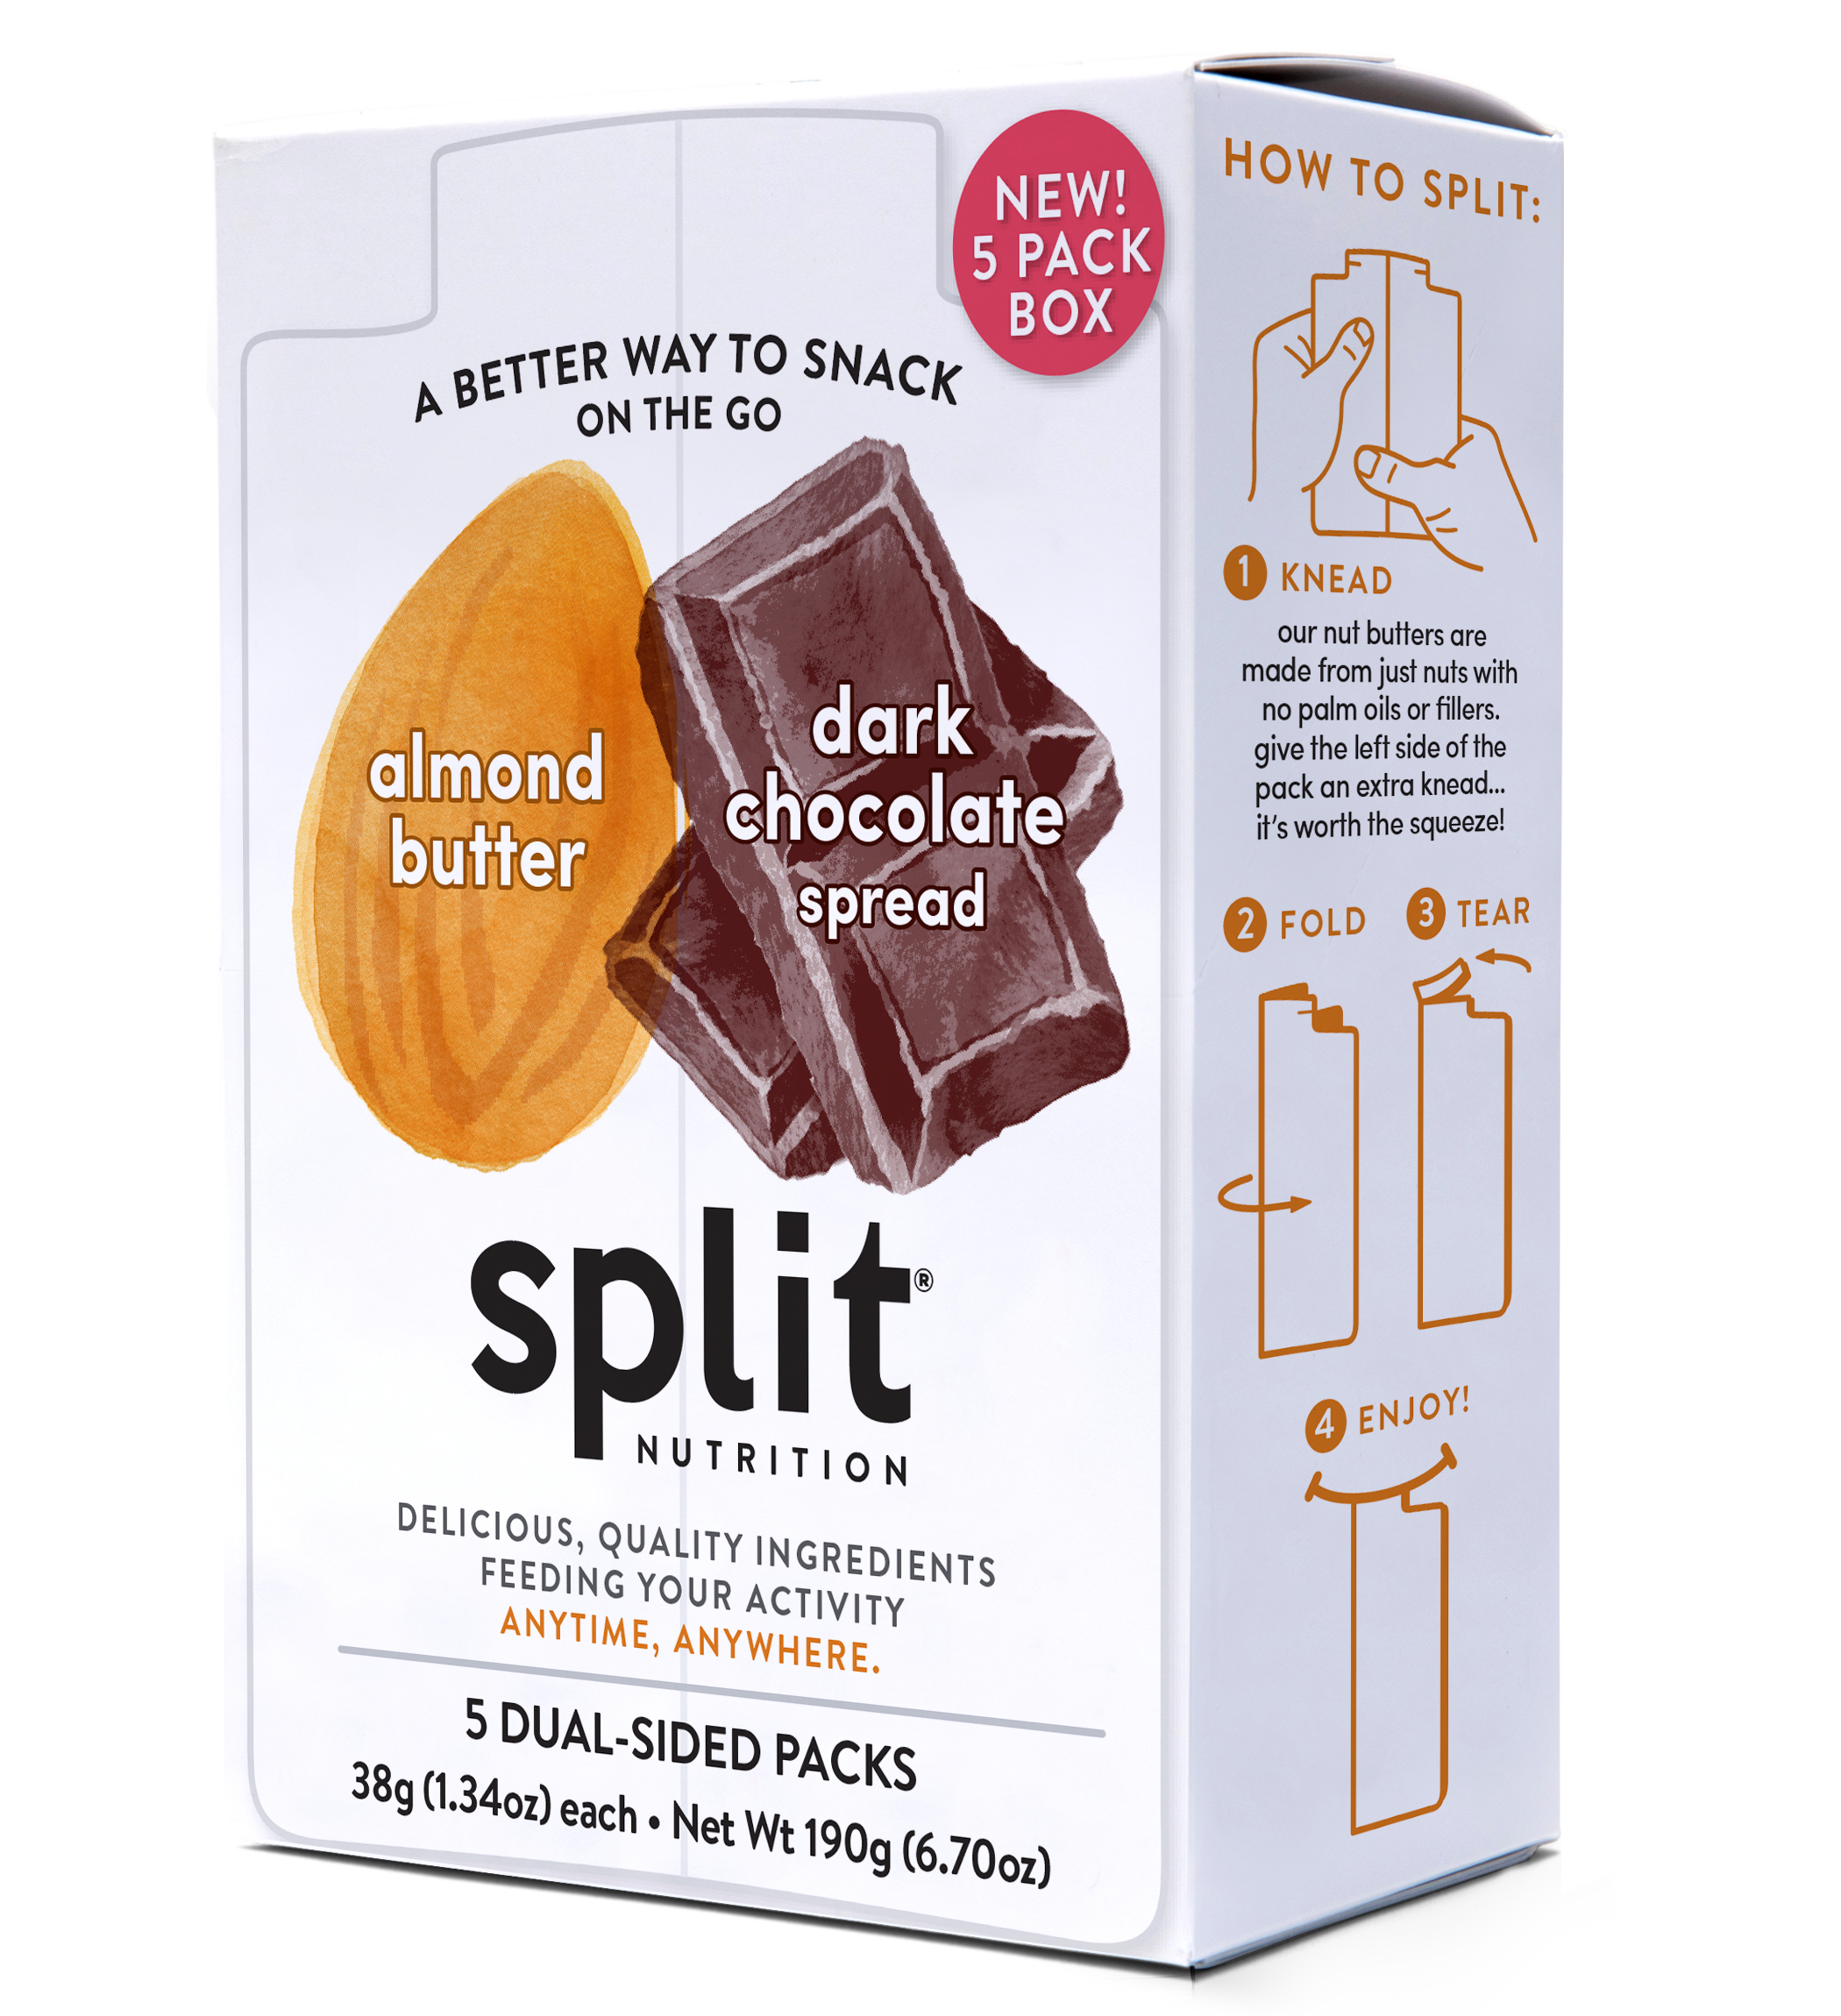 Split Nutrition Almond Butter and Chocolate Spread (5ct box) 8 innerpacks per case 6.7 oz